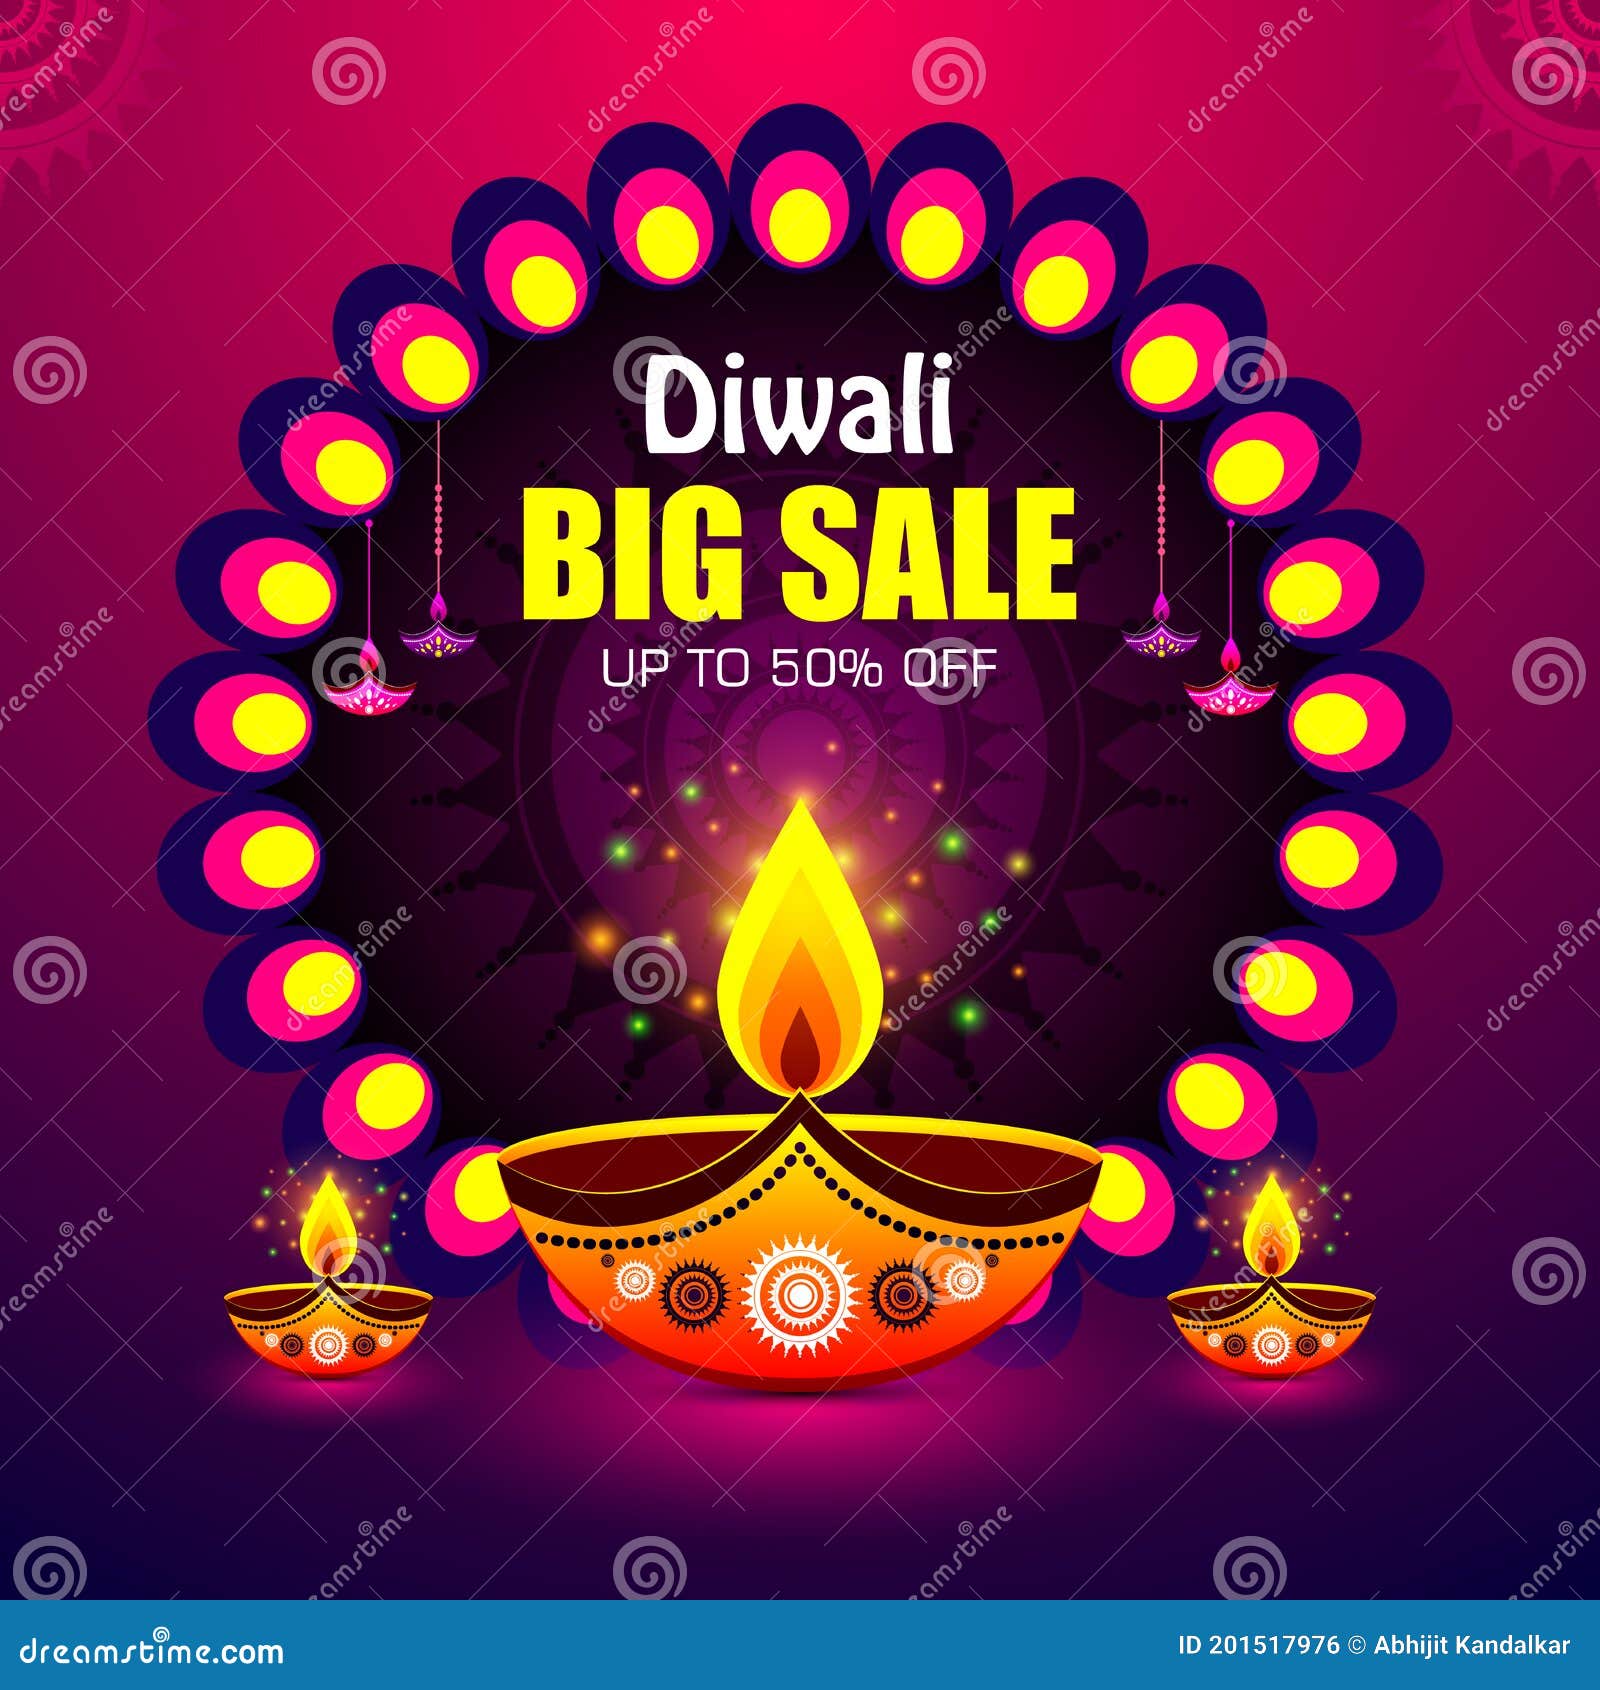 Happy diwali celebration background top view of banner design posters for  the wall  posters yellow wallpaper vector  myloviewcom